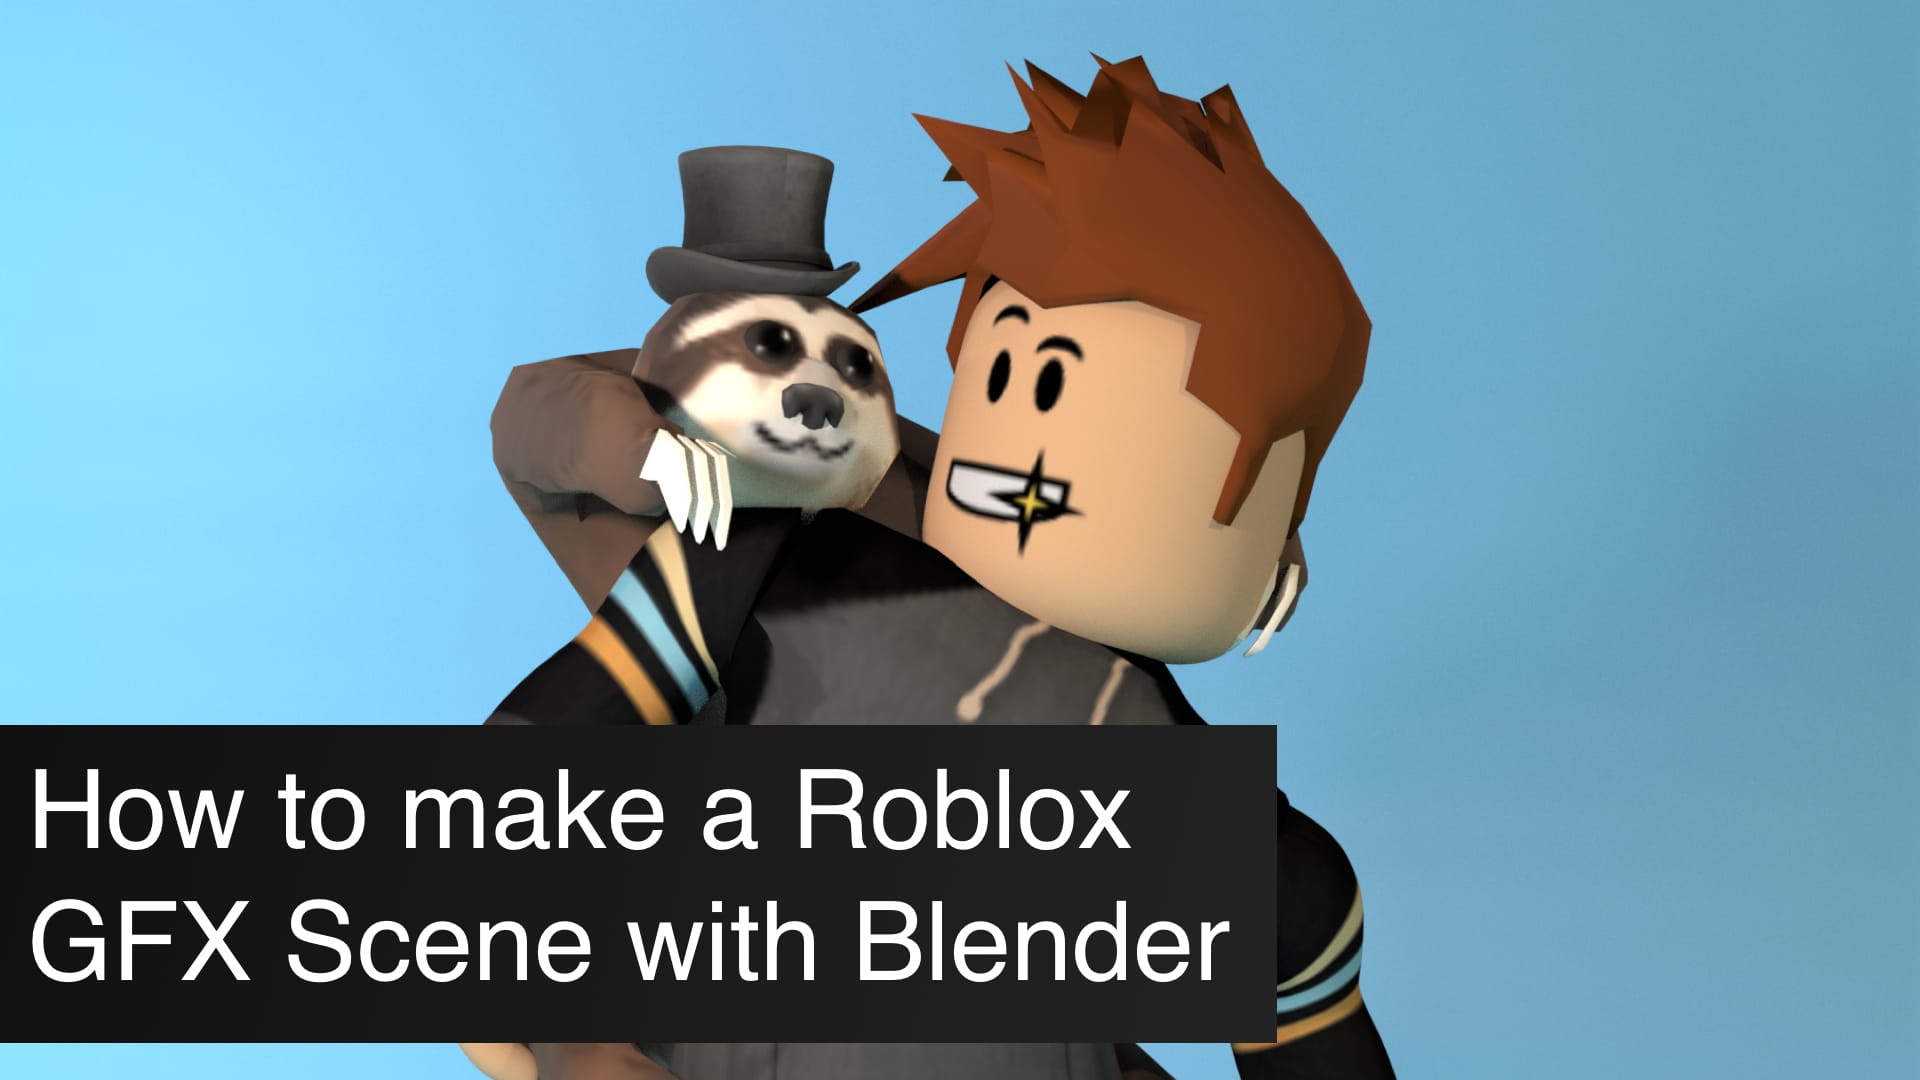 How to make a Roblox GFX - Beginner Tutorial - All Free 